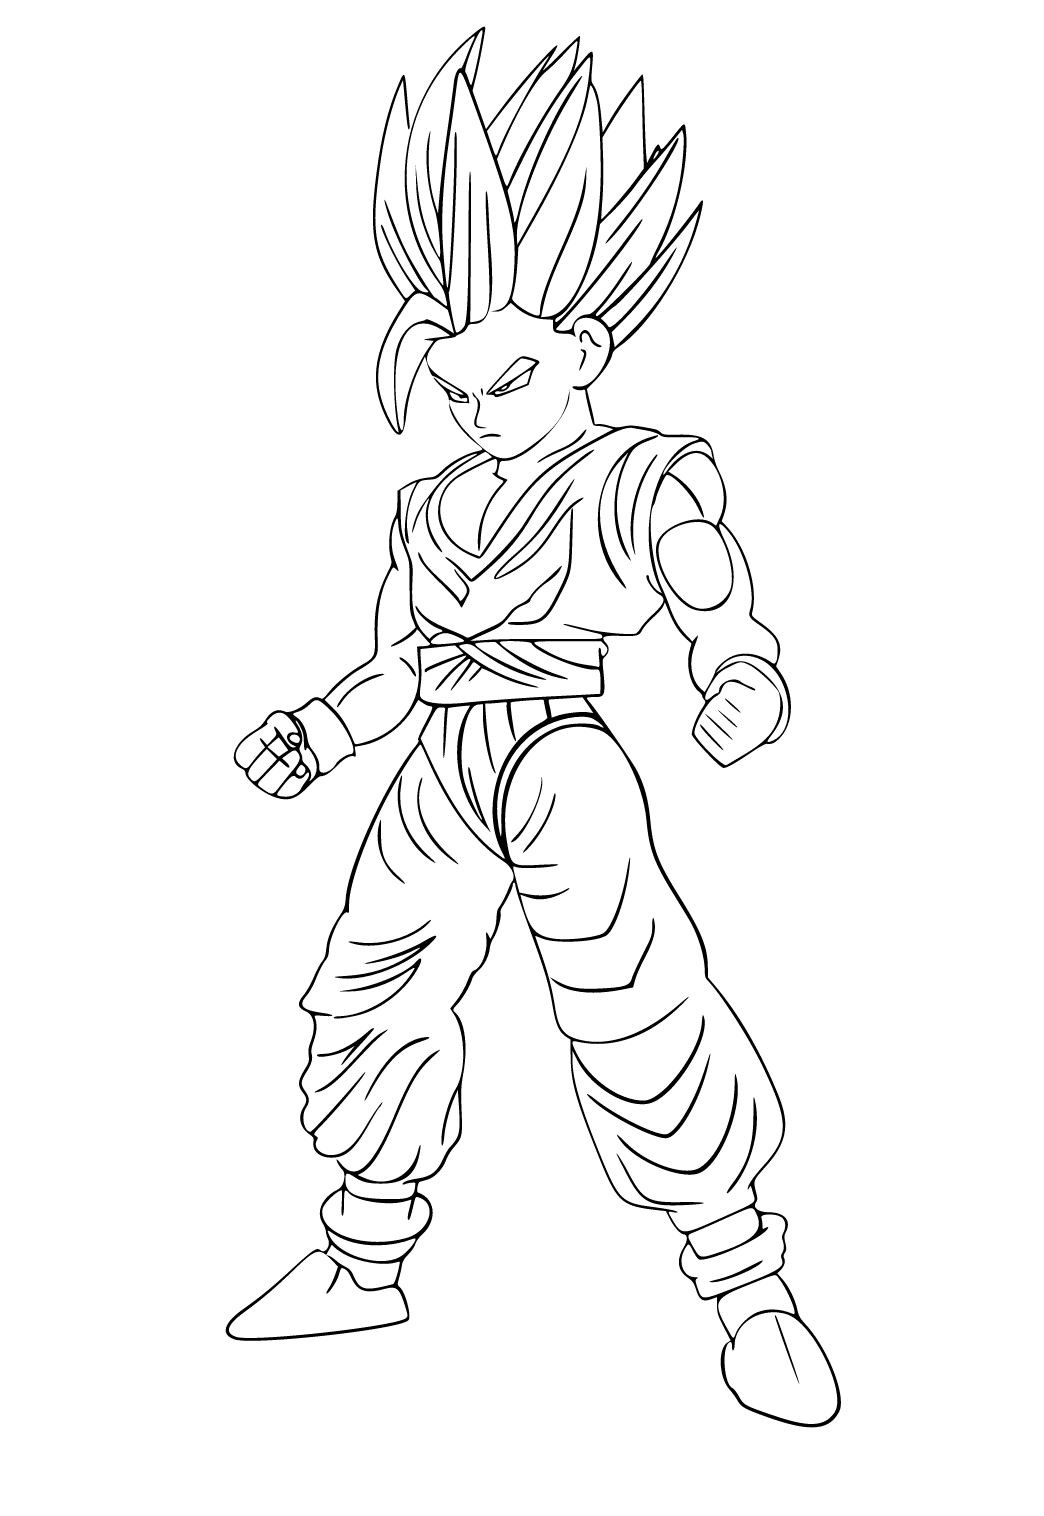 Free Printable Dragon Ball Z Goku Coloring Page, Sheet and Picture for  Adults and Kids (Girls and Boys) - Babeled.com